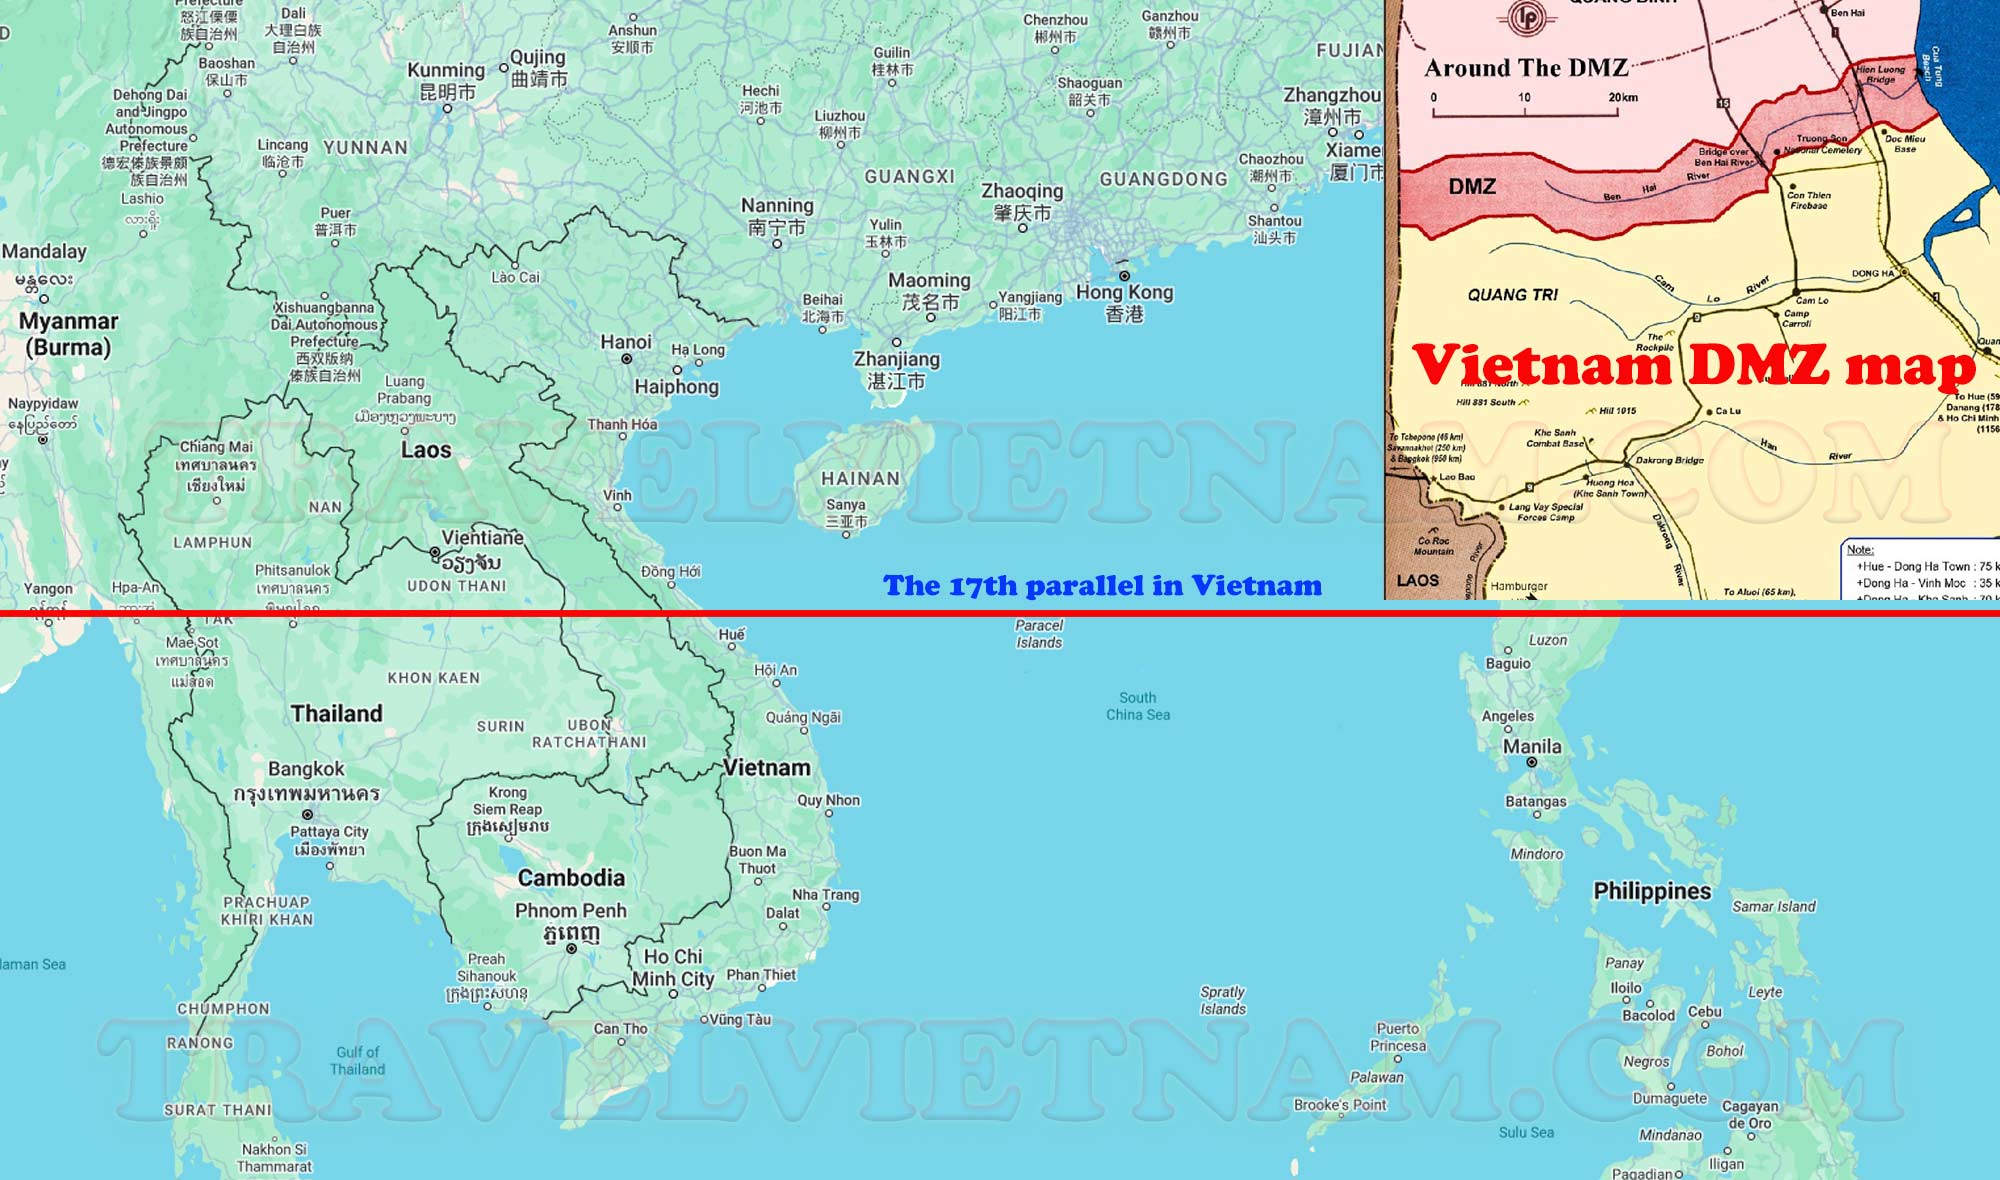 A map of the Vietnamese Demilitarized Zone (DMZ). This zone separated North and South Vietnam during the Vietnam War and served as a tense border region.